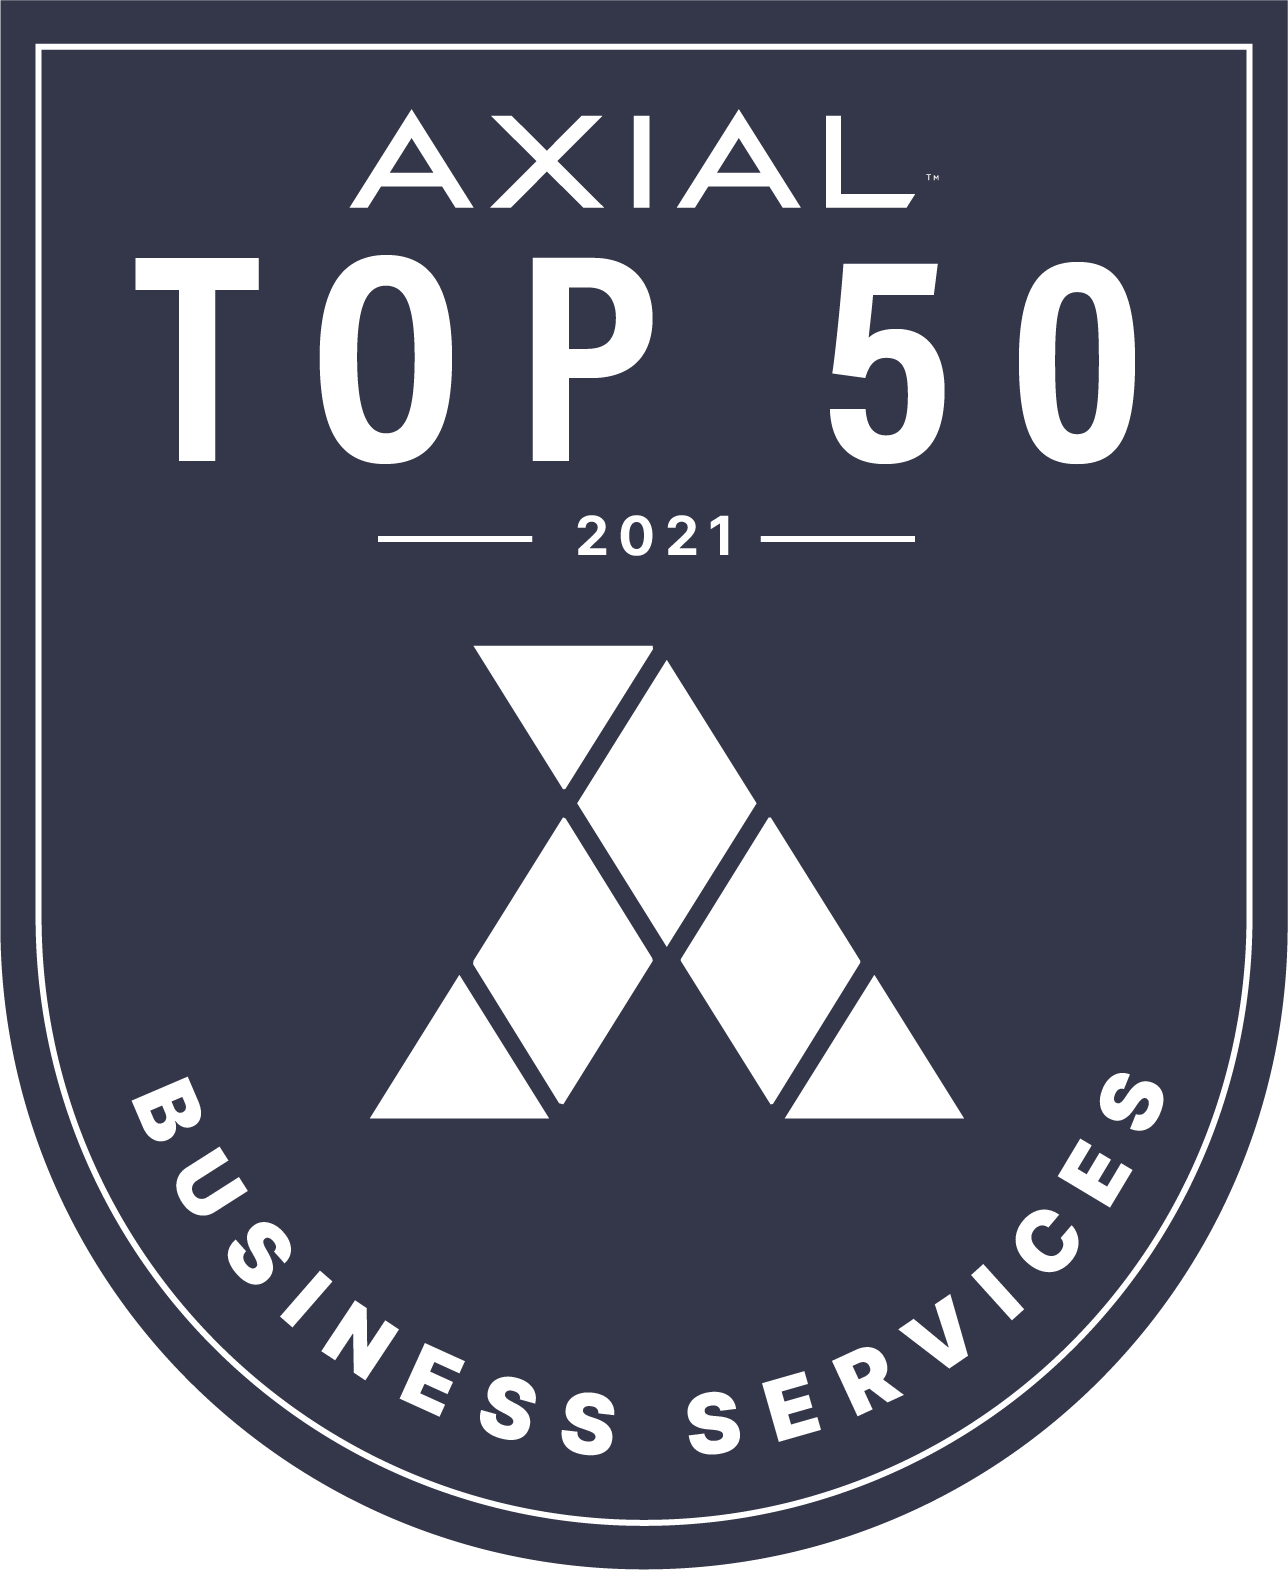 Axial Top 50 Business Services